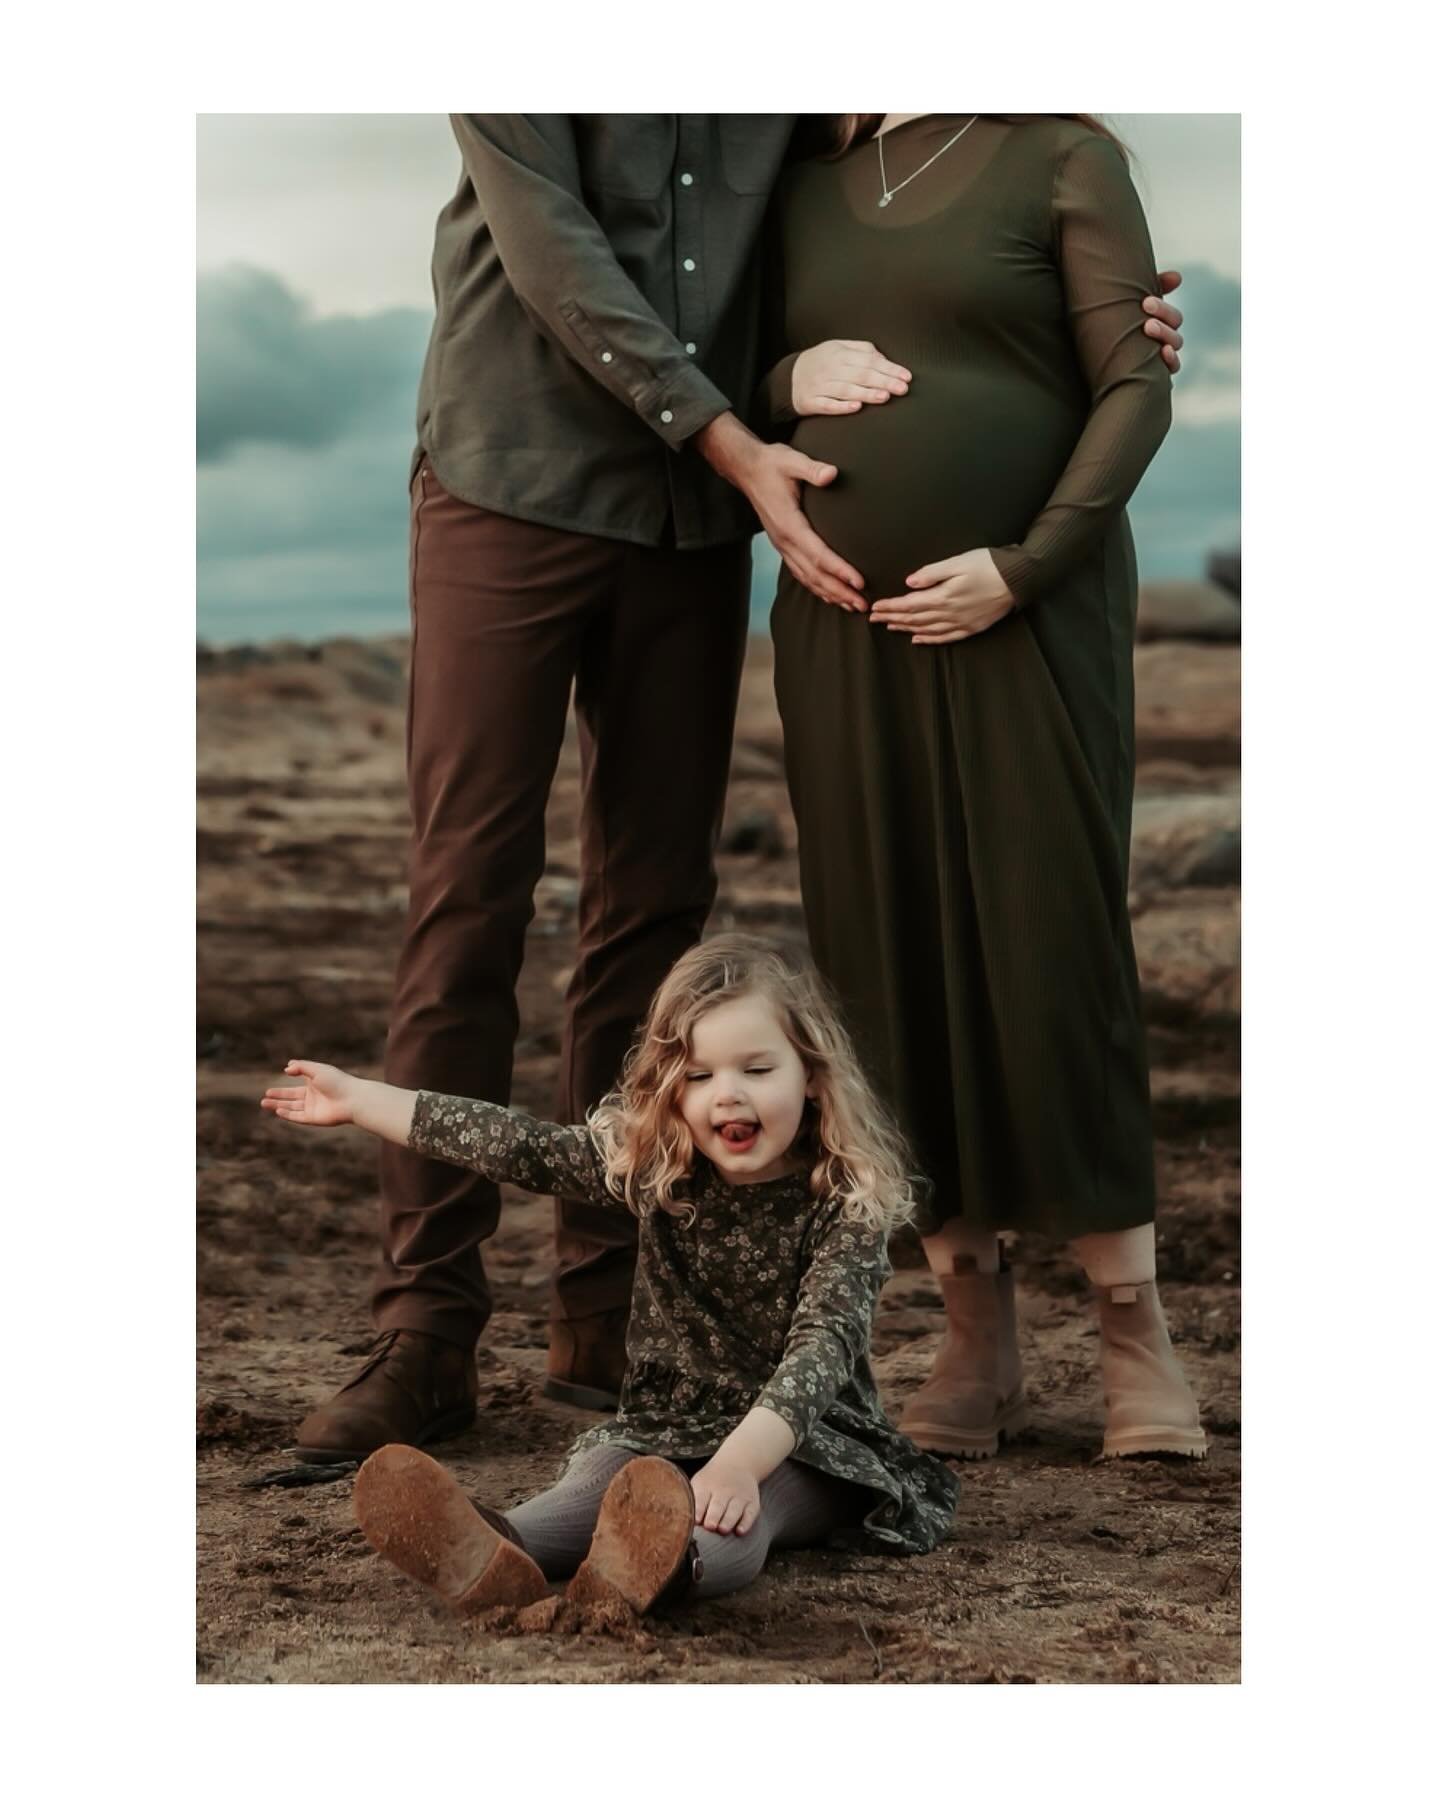 I absolutely adore the beautiful simplicity that shines through in this stunning family maternity session. The way this family is so effortlessly connected and present with each other is truly heartwarming. It is a privilege for me to be able to capt